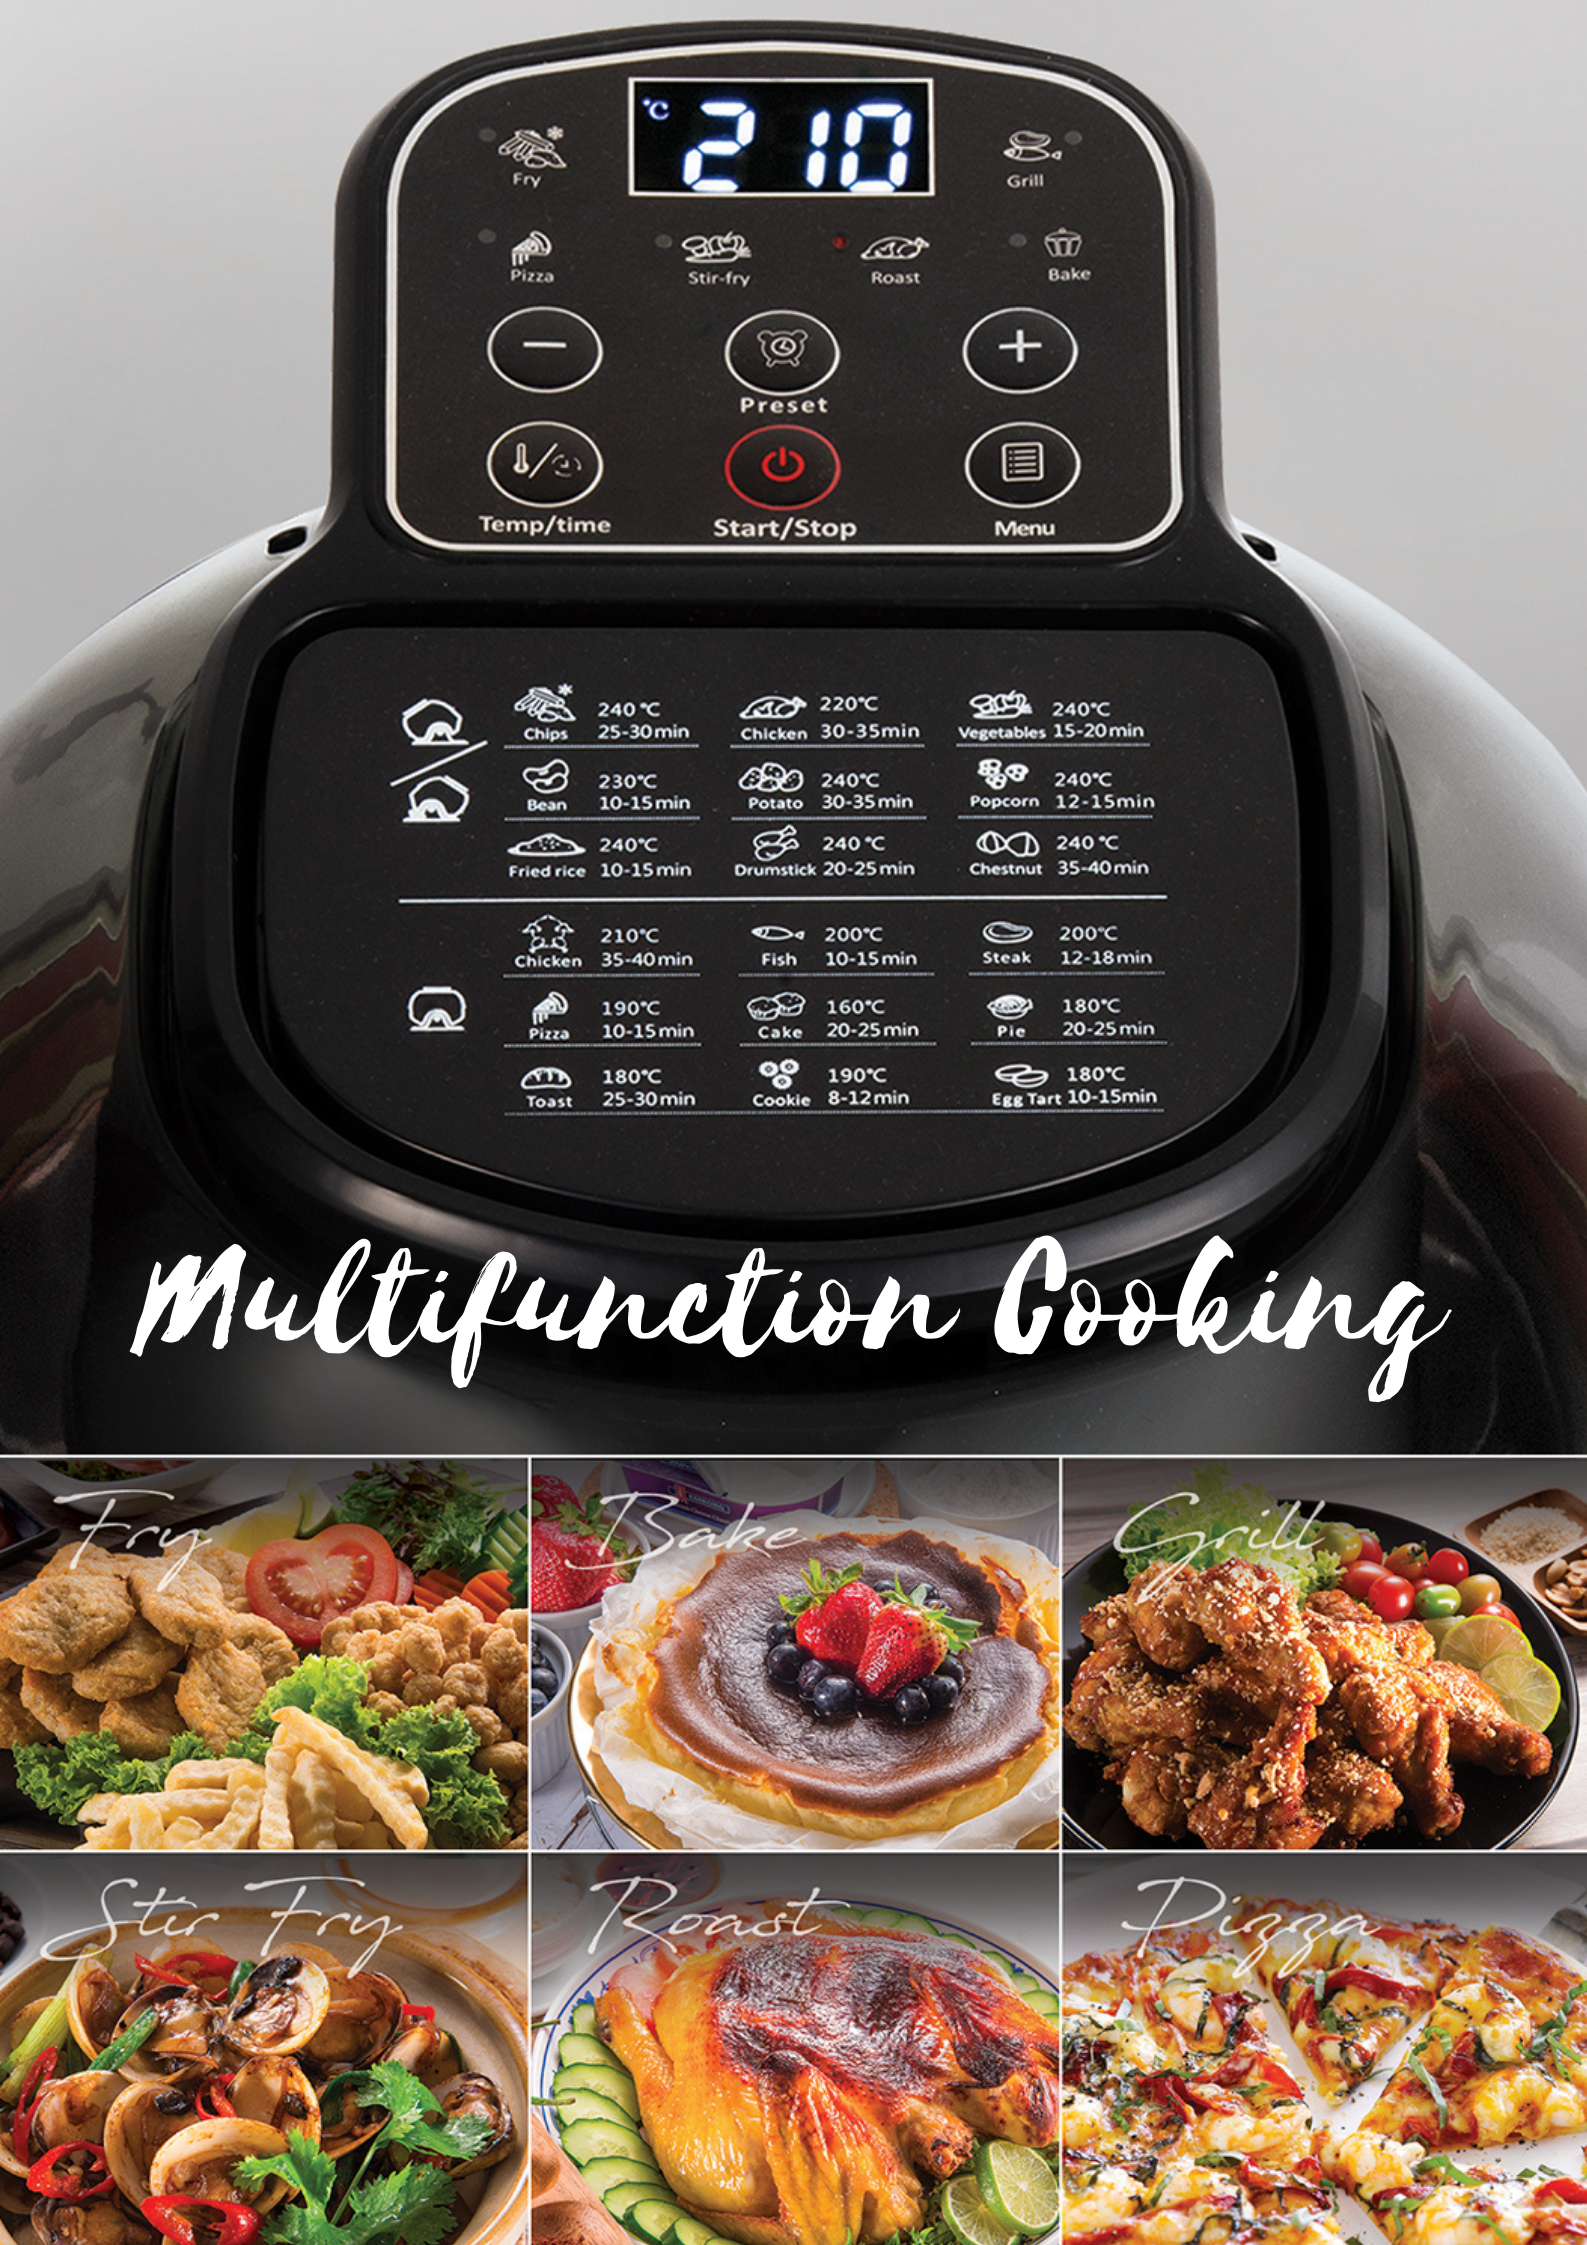 Buffalo Stainless Steel Chemical Free Smart Air Fryer 2.0 Pro Chef Plus